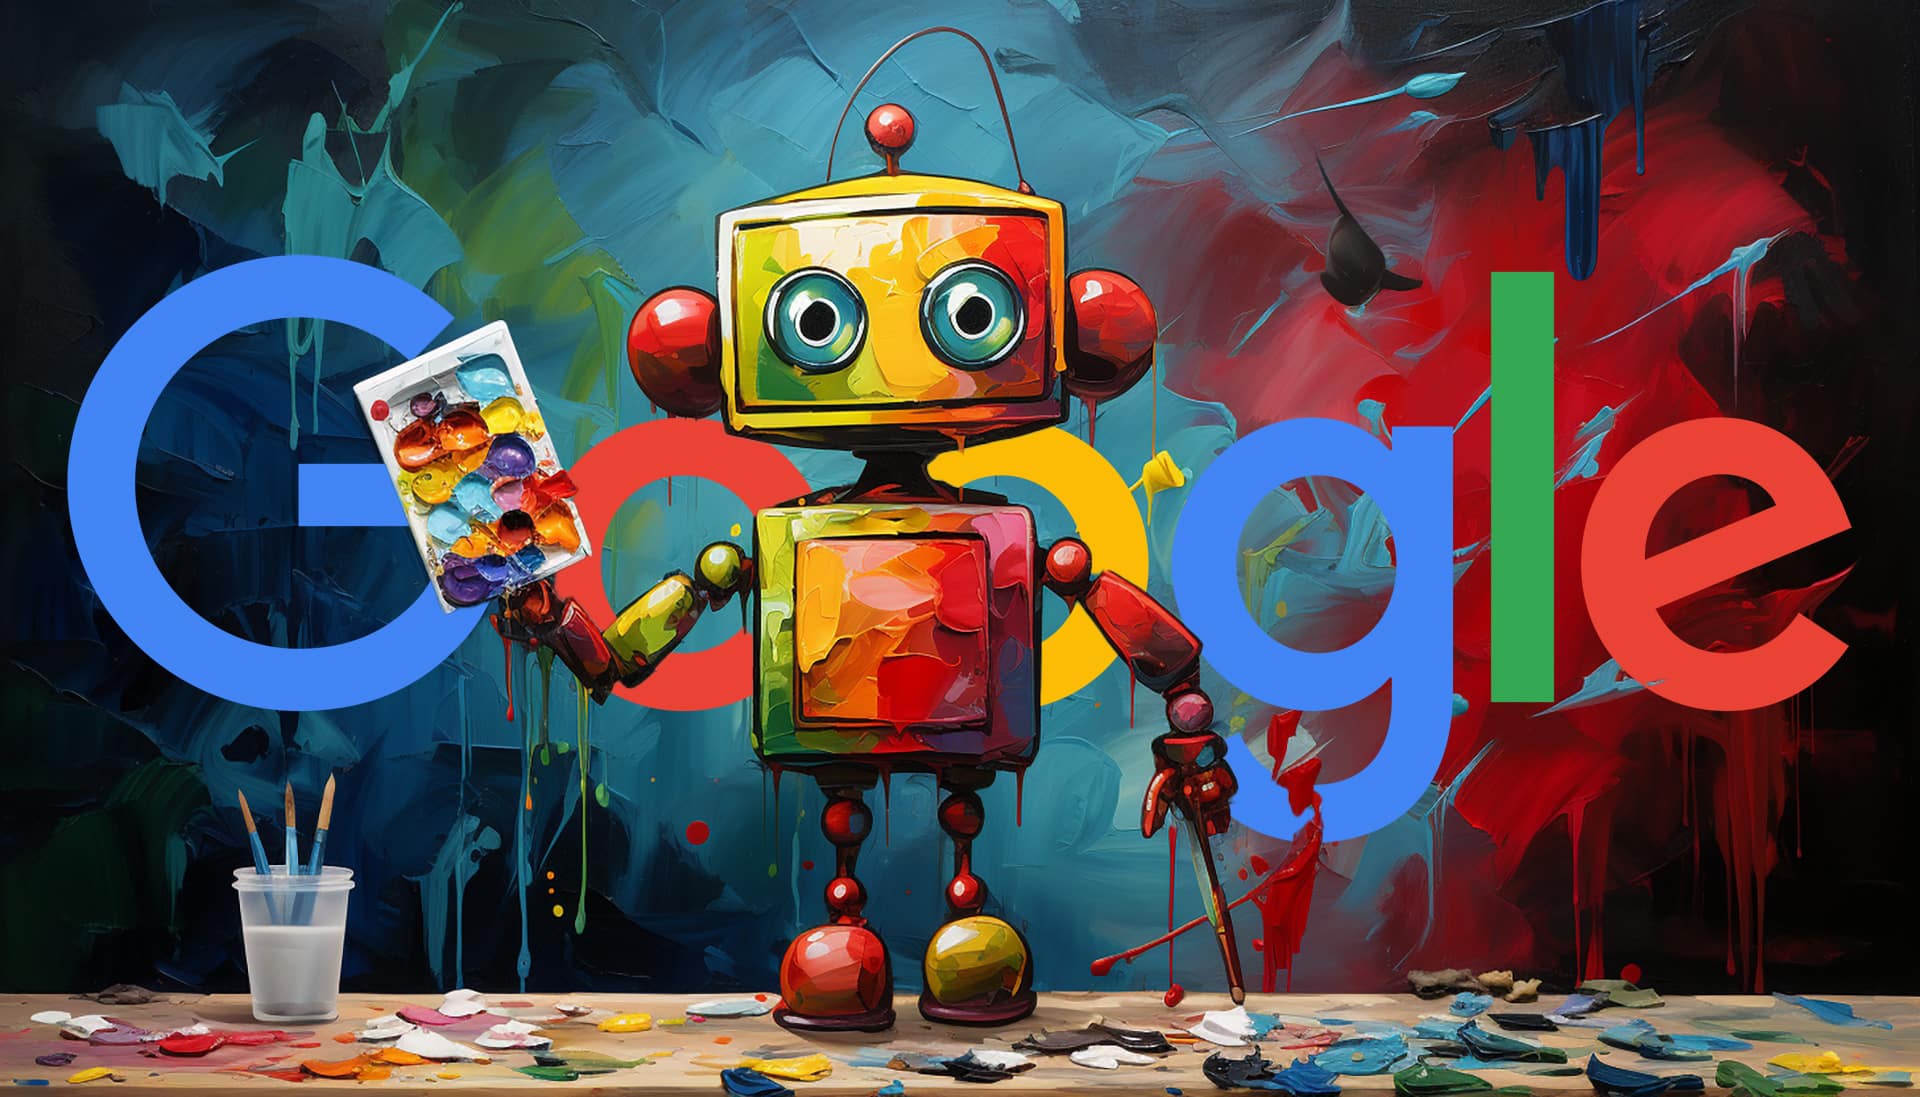 #Google Core Web Vitals to add Interaction to Next Paint on March 12